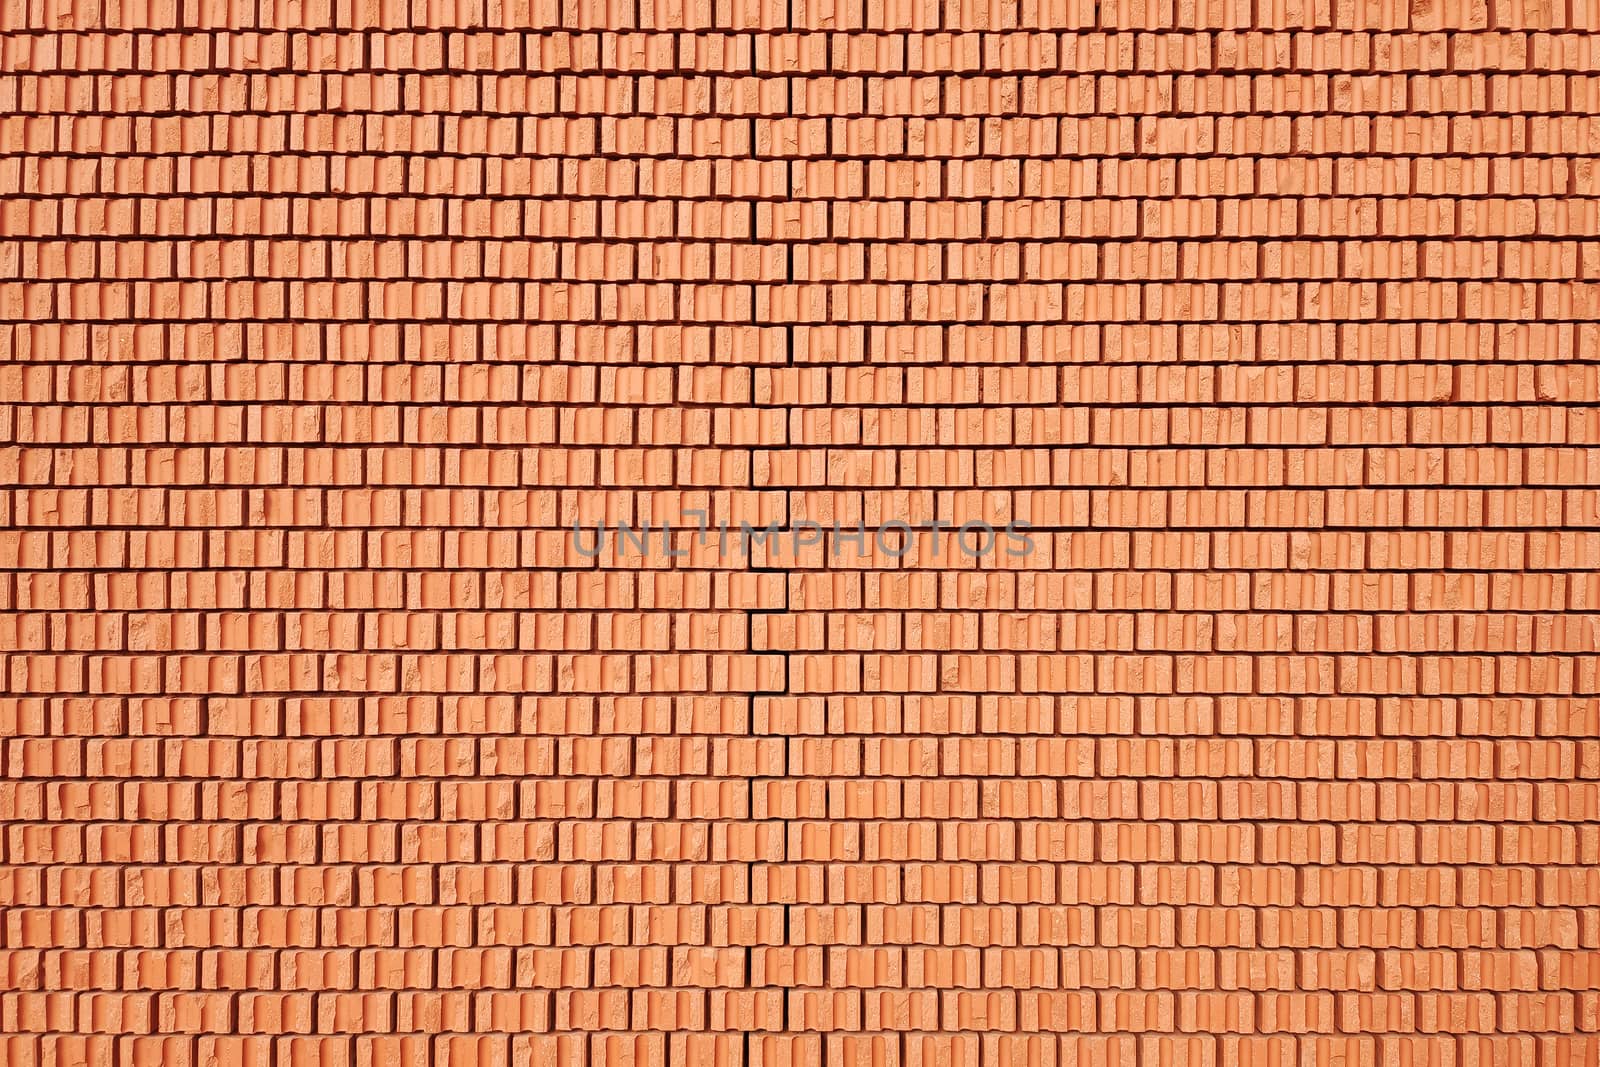 An image of a red brick wall background